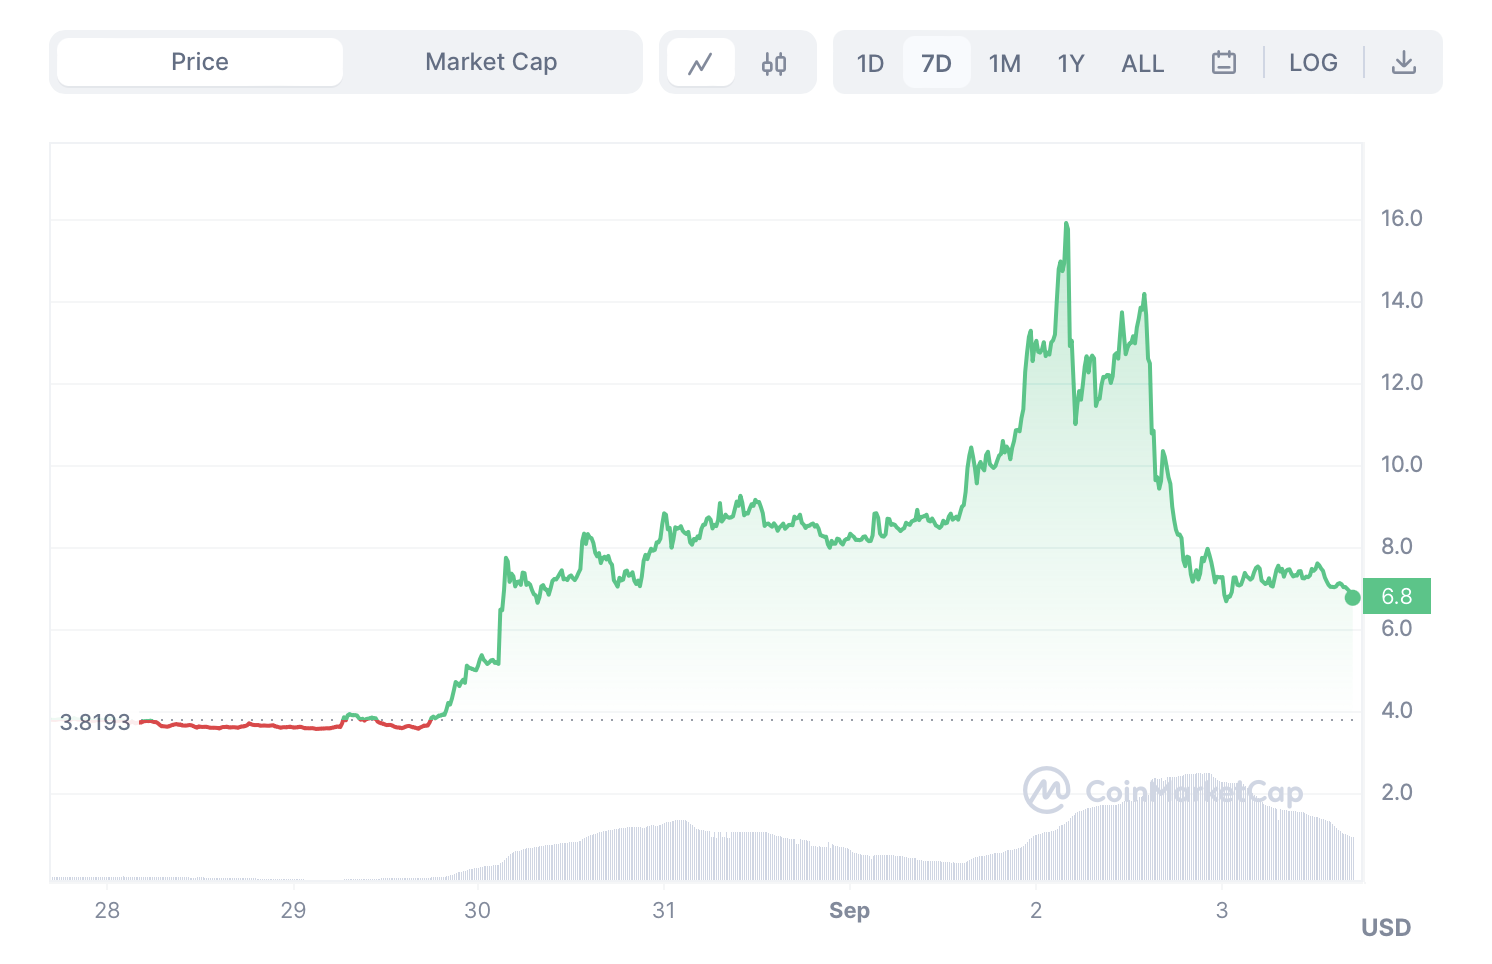 CyberConnect Price Prediction: CYBER Climbed 83% This Week – Is The Digital Realm The New Gold Mine?